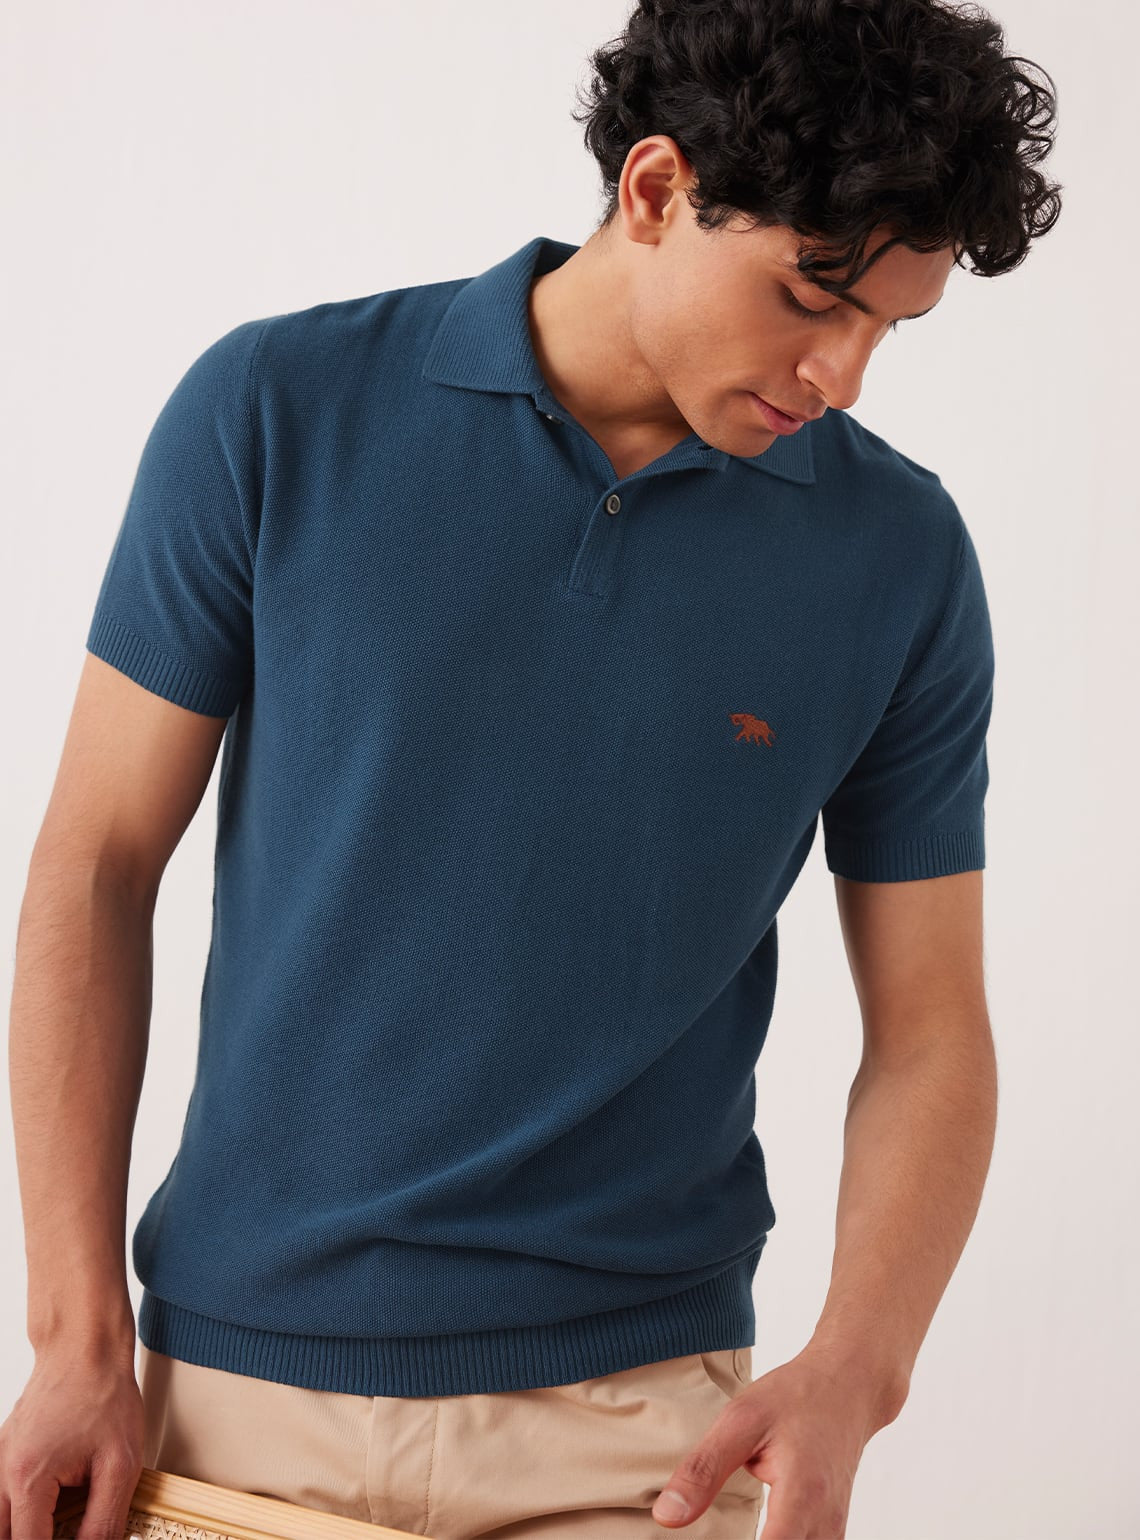 Pacific Blue Knit Polo